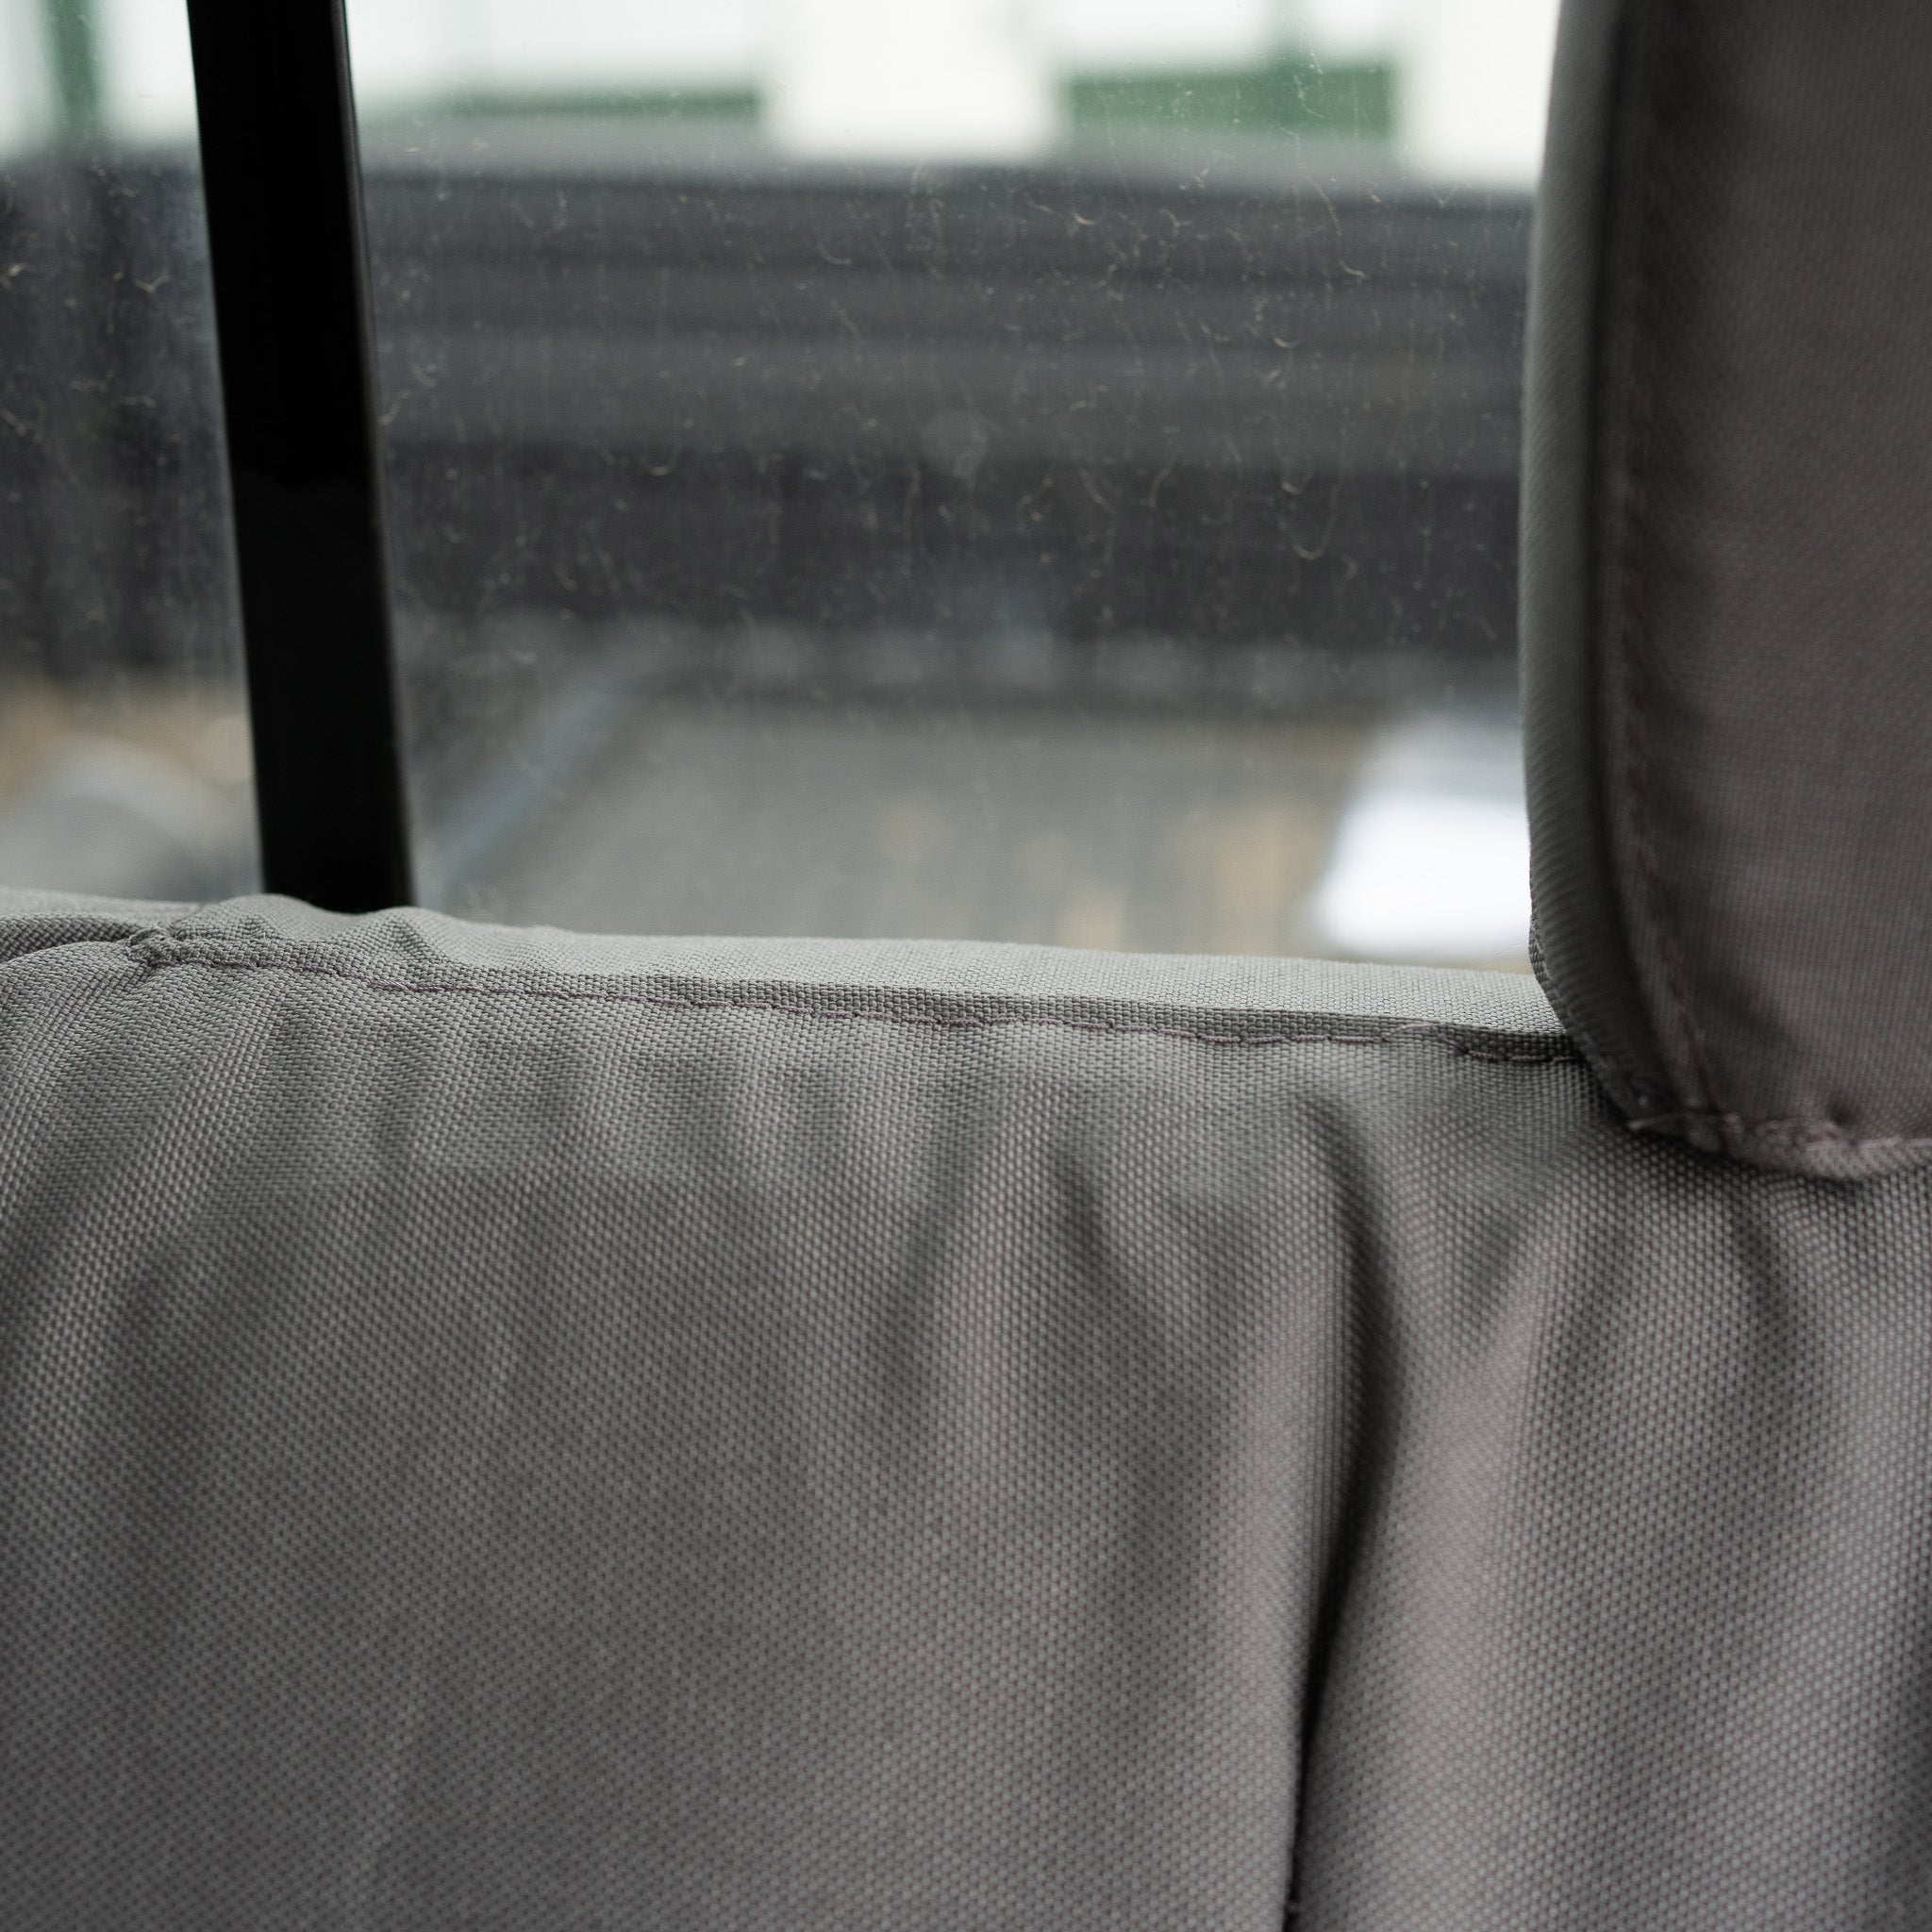 Detail photo showing a seam on this TigerTough seat cover for a RAM full bench seat.